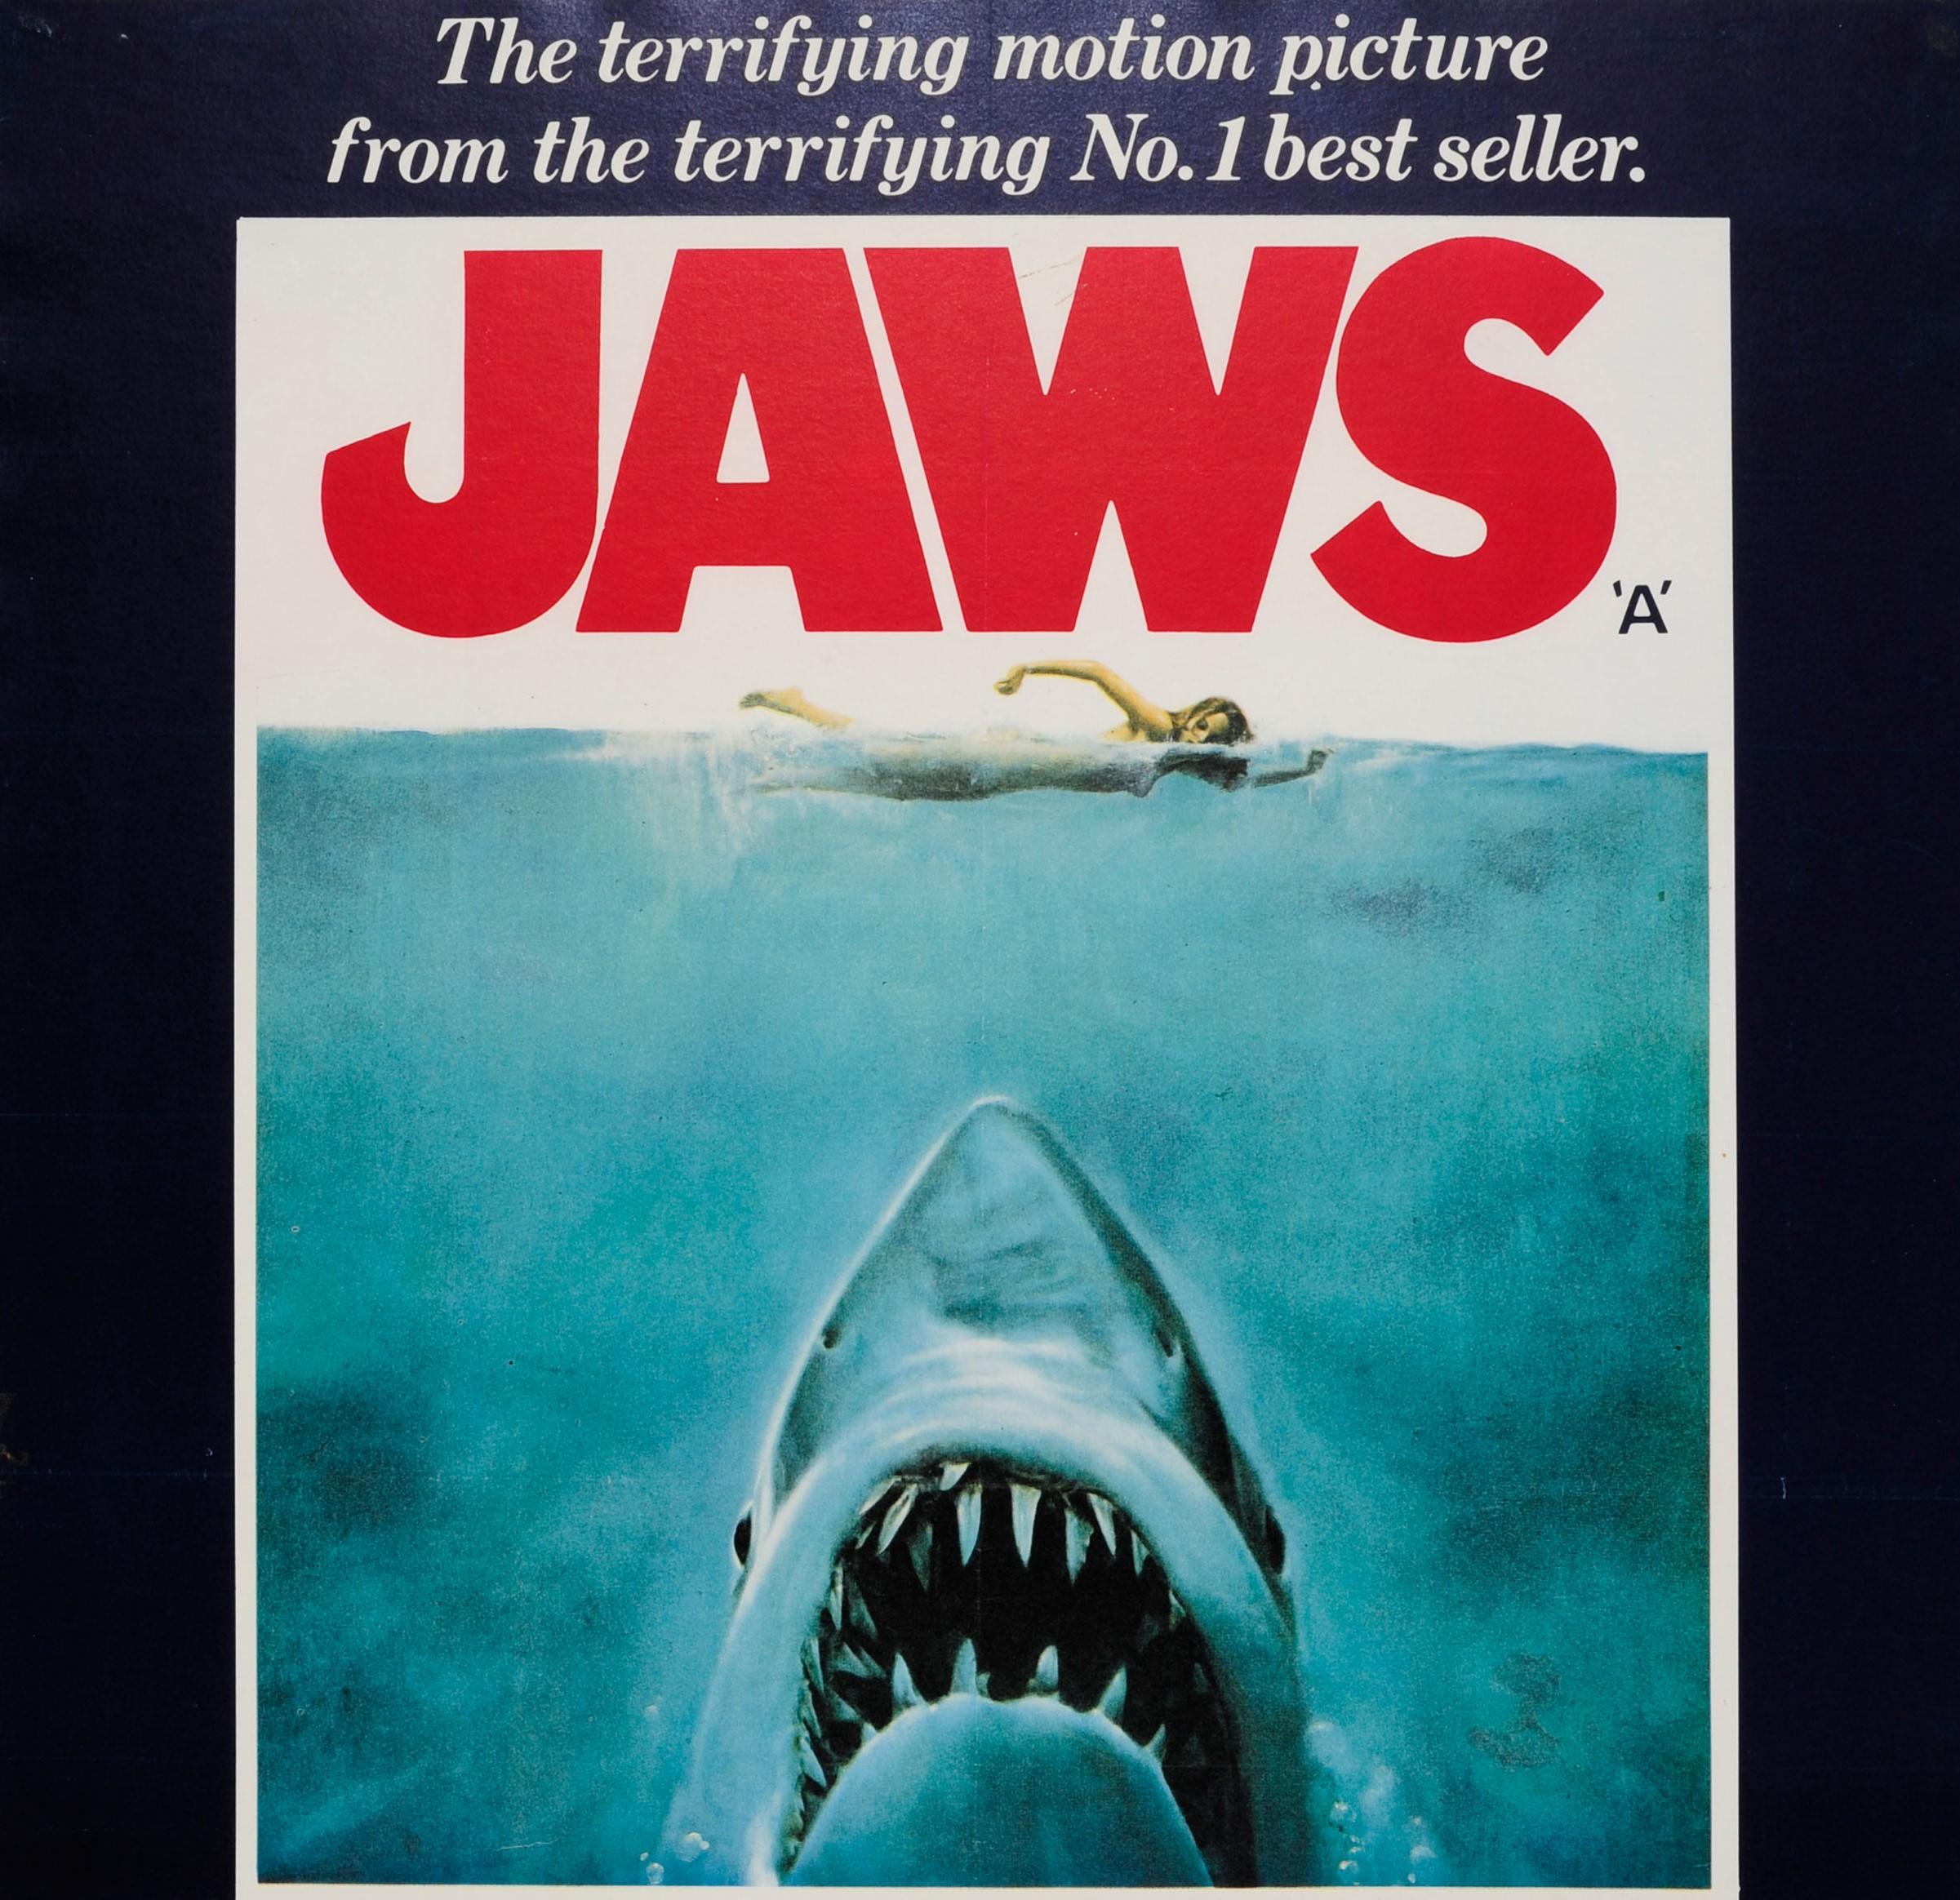 Original vintage movie poster for the Classic thriller film Jaws directed by Steven Spielberg based on the book by Peter Benchley and starring Roy Scheider, Robert Shaw and Richard Dreyfuss - 